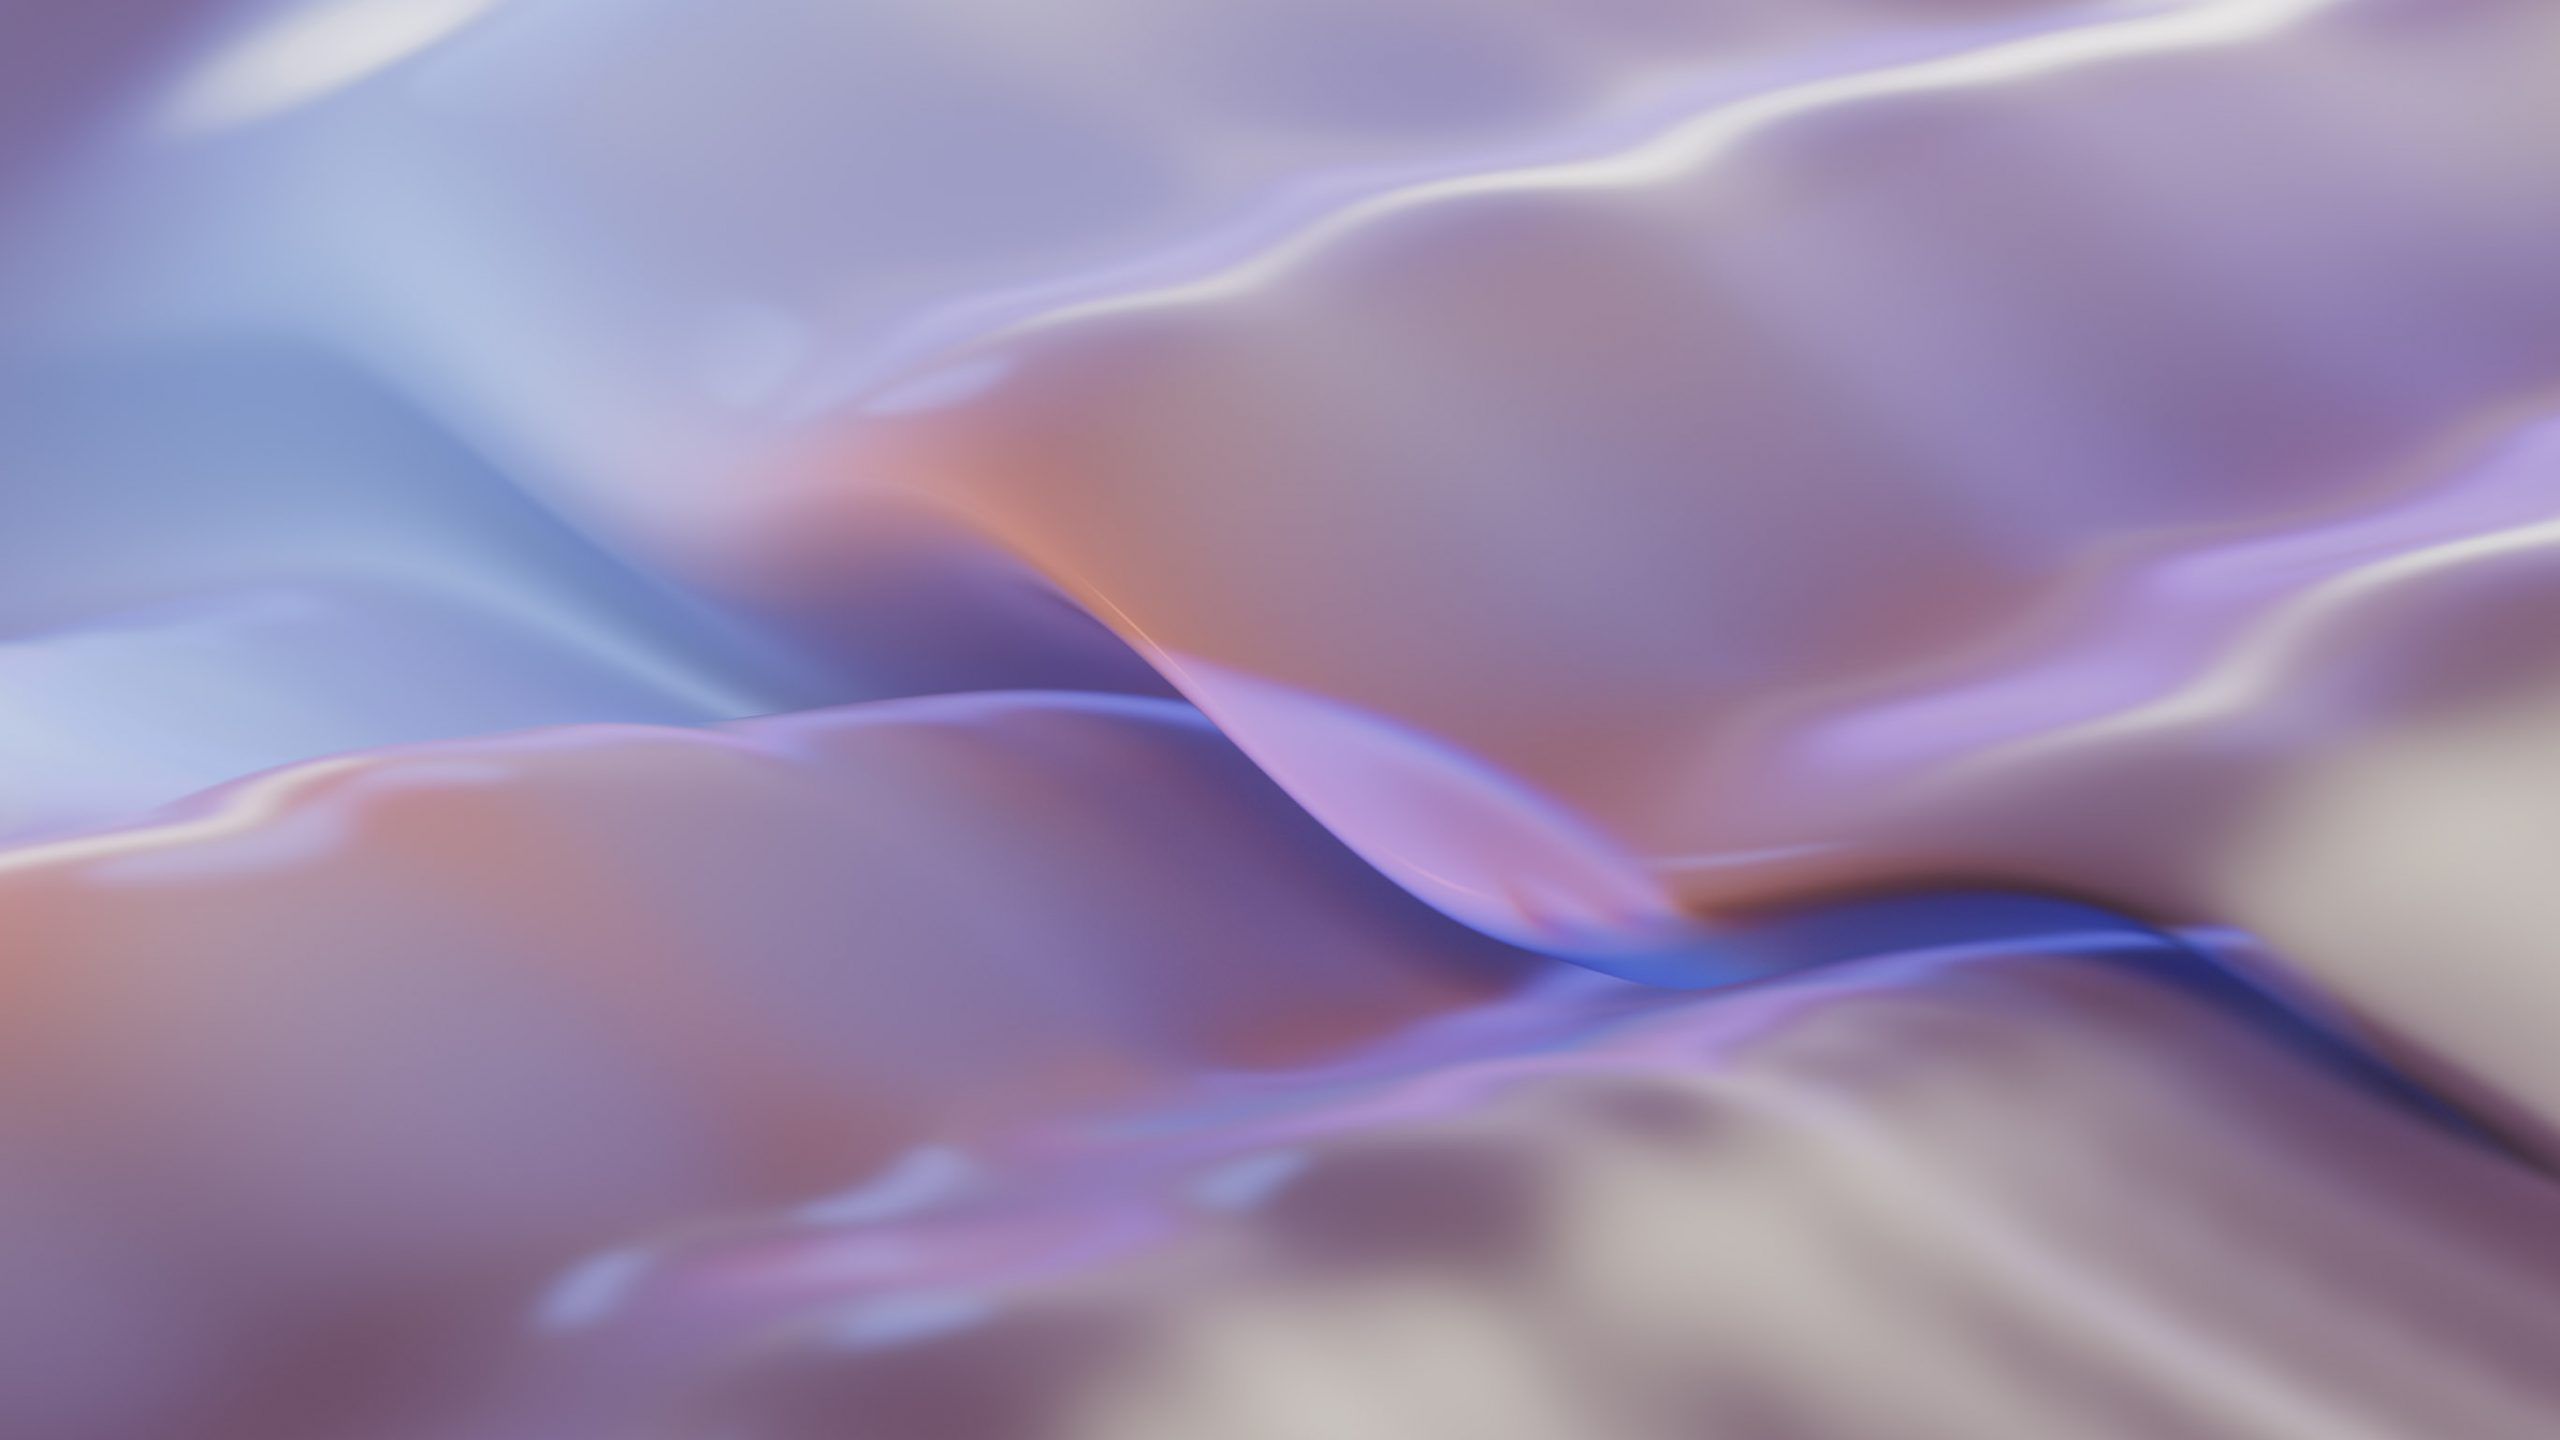 A close up of a purple and blue fabric. - Windows 11